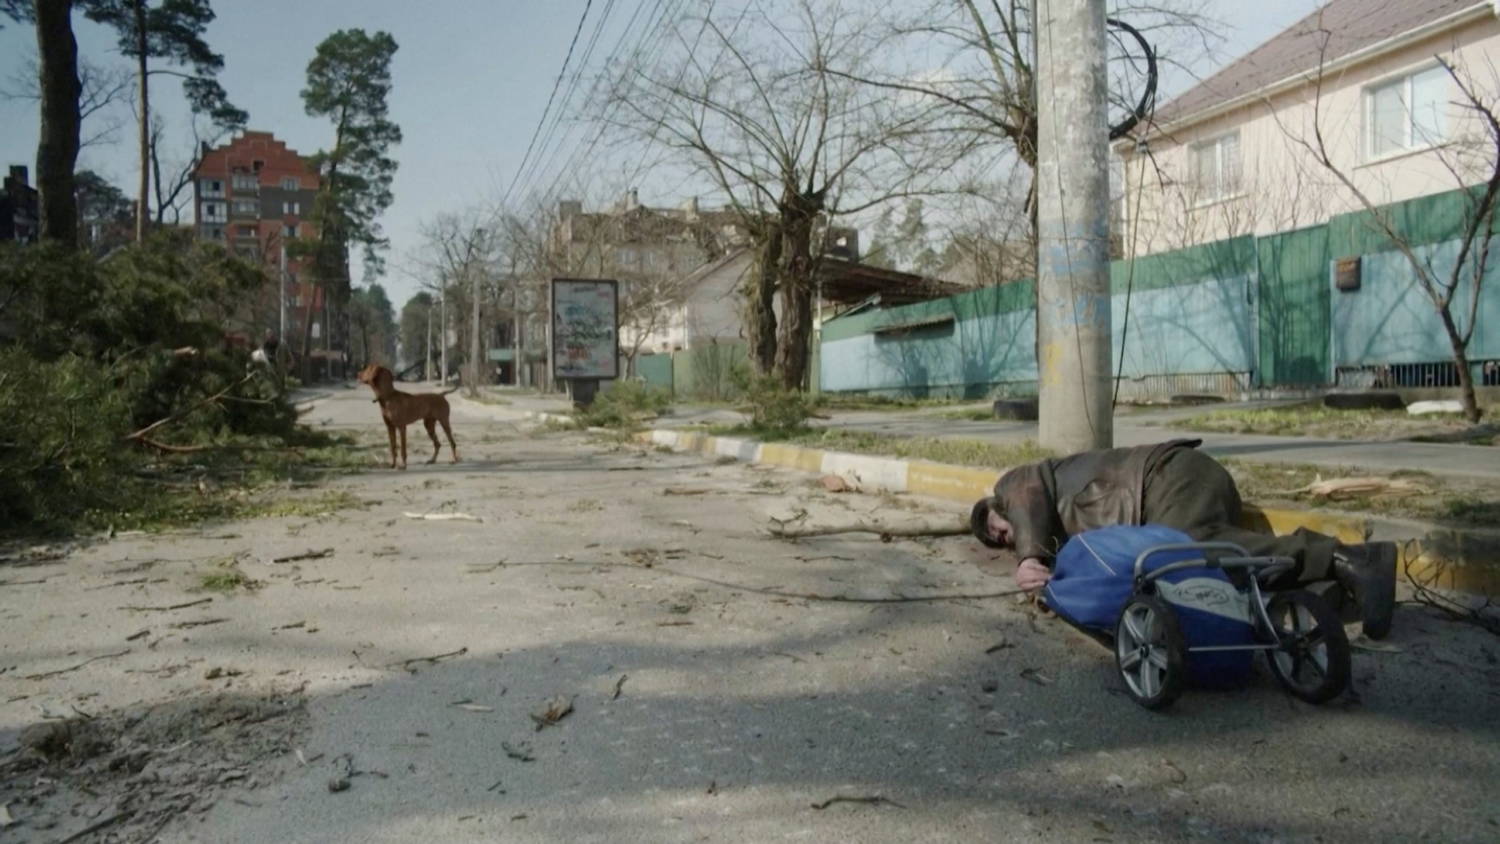 Scenes From Irpin Amid Russia's Invasion Of Ukraine